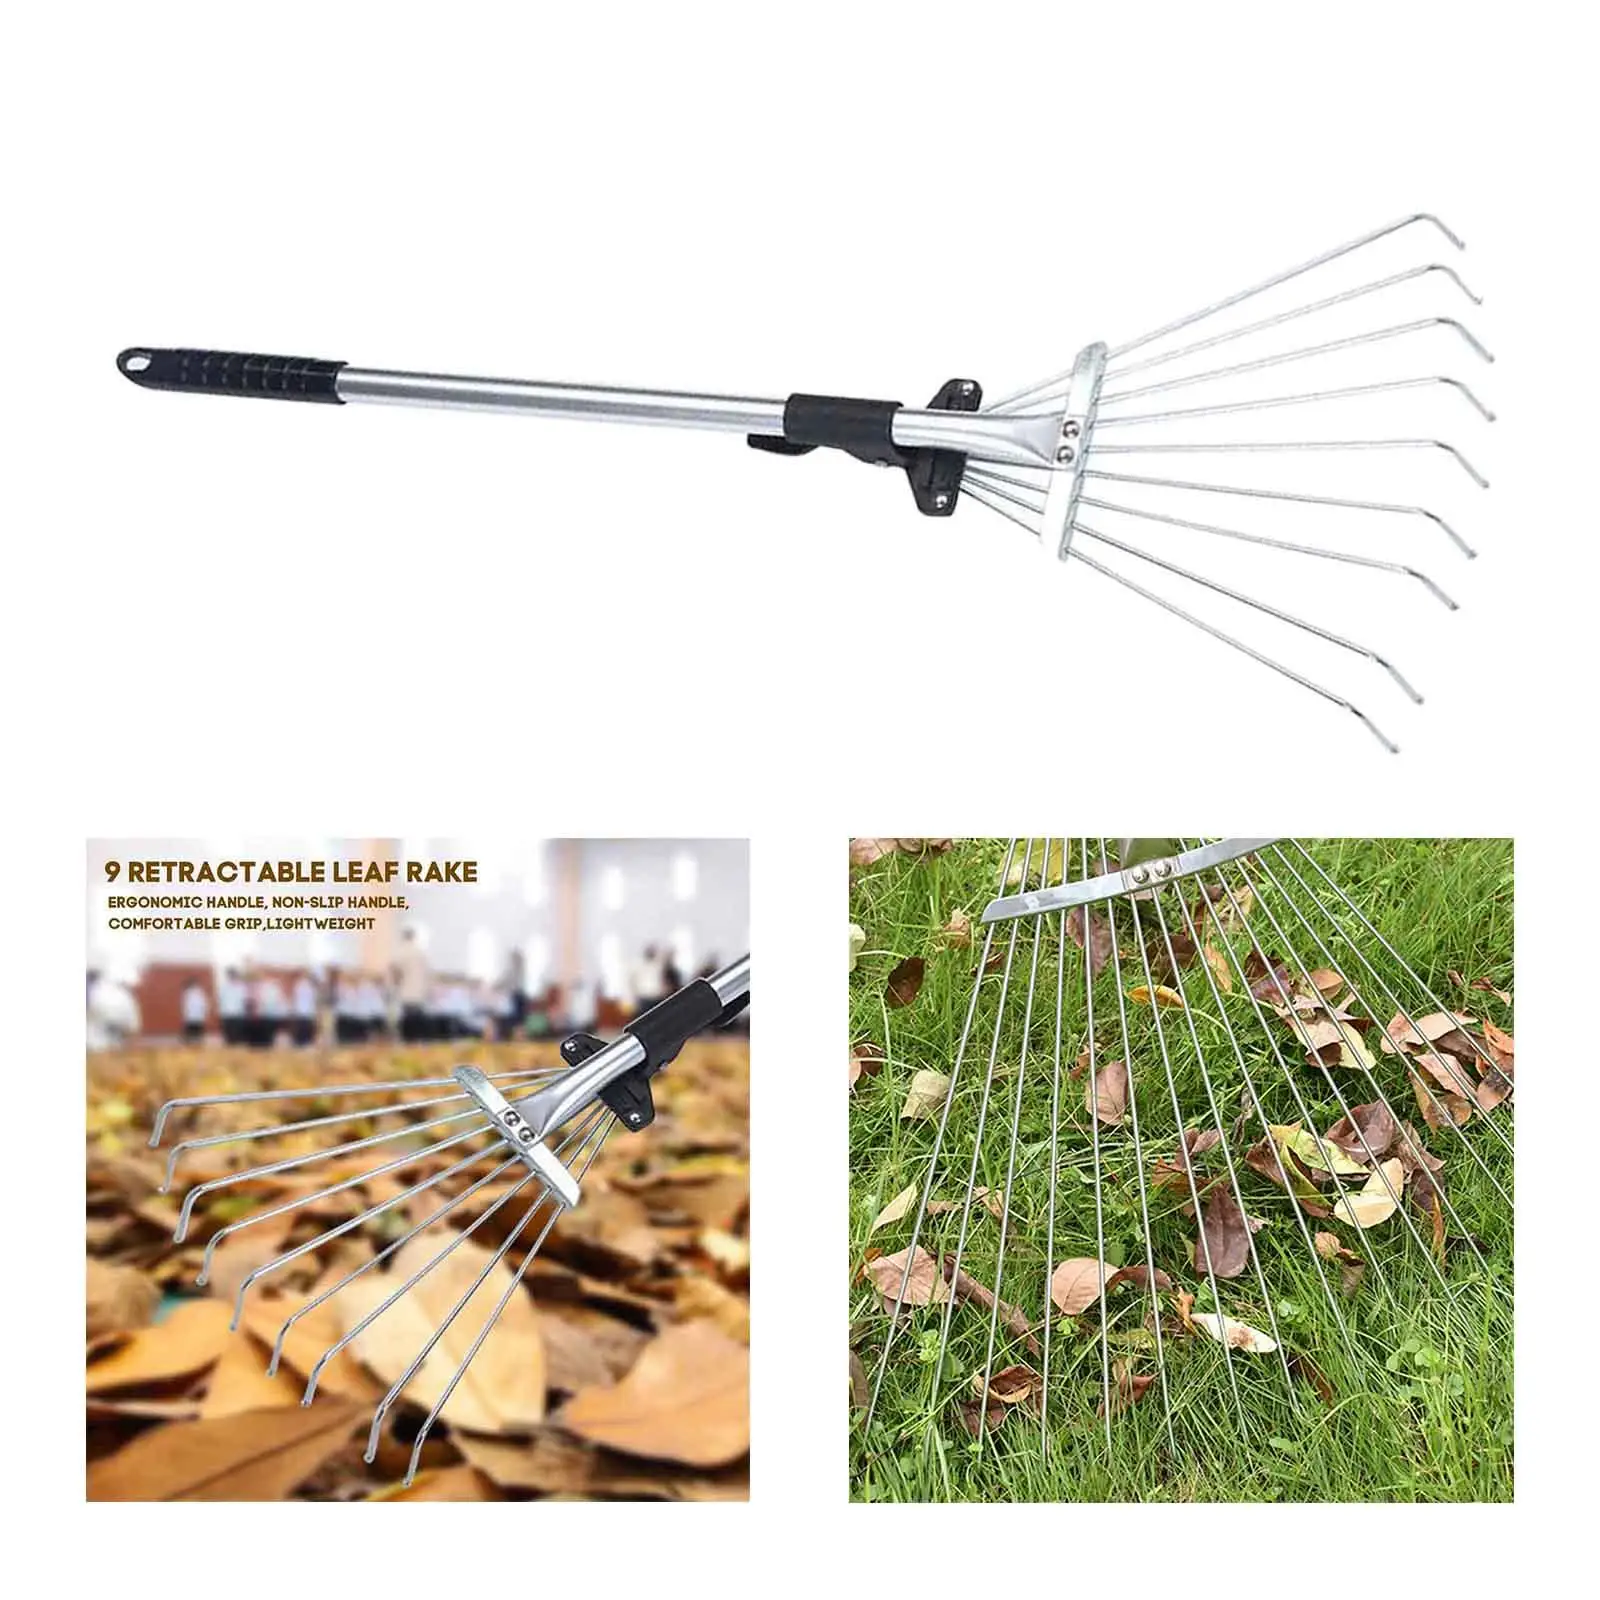 Garden Leaf Rake Adjustable Collapsible Folding Head for Window Wells Plants Lawns Camping